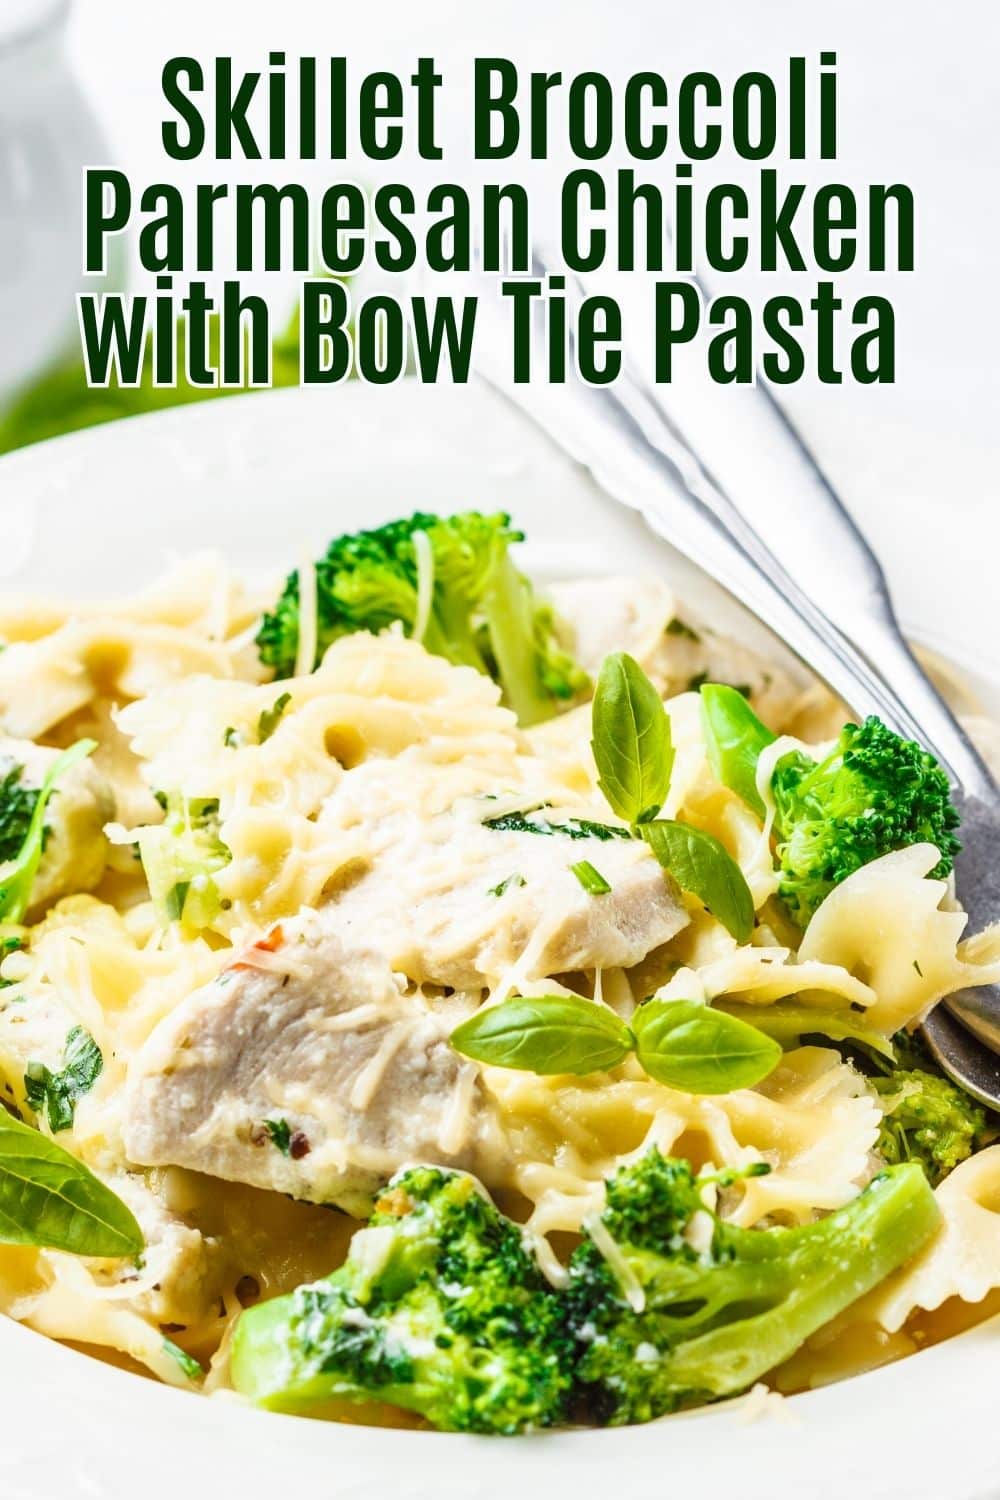 Skillet Broccoli Parmesan Chicken with Bow Tie Pasta Pin